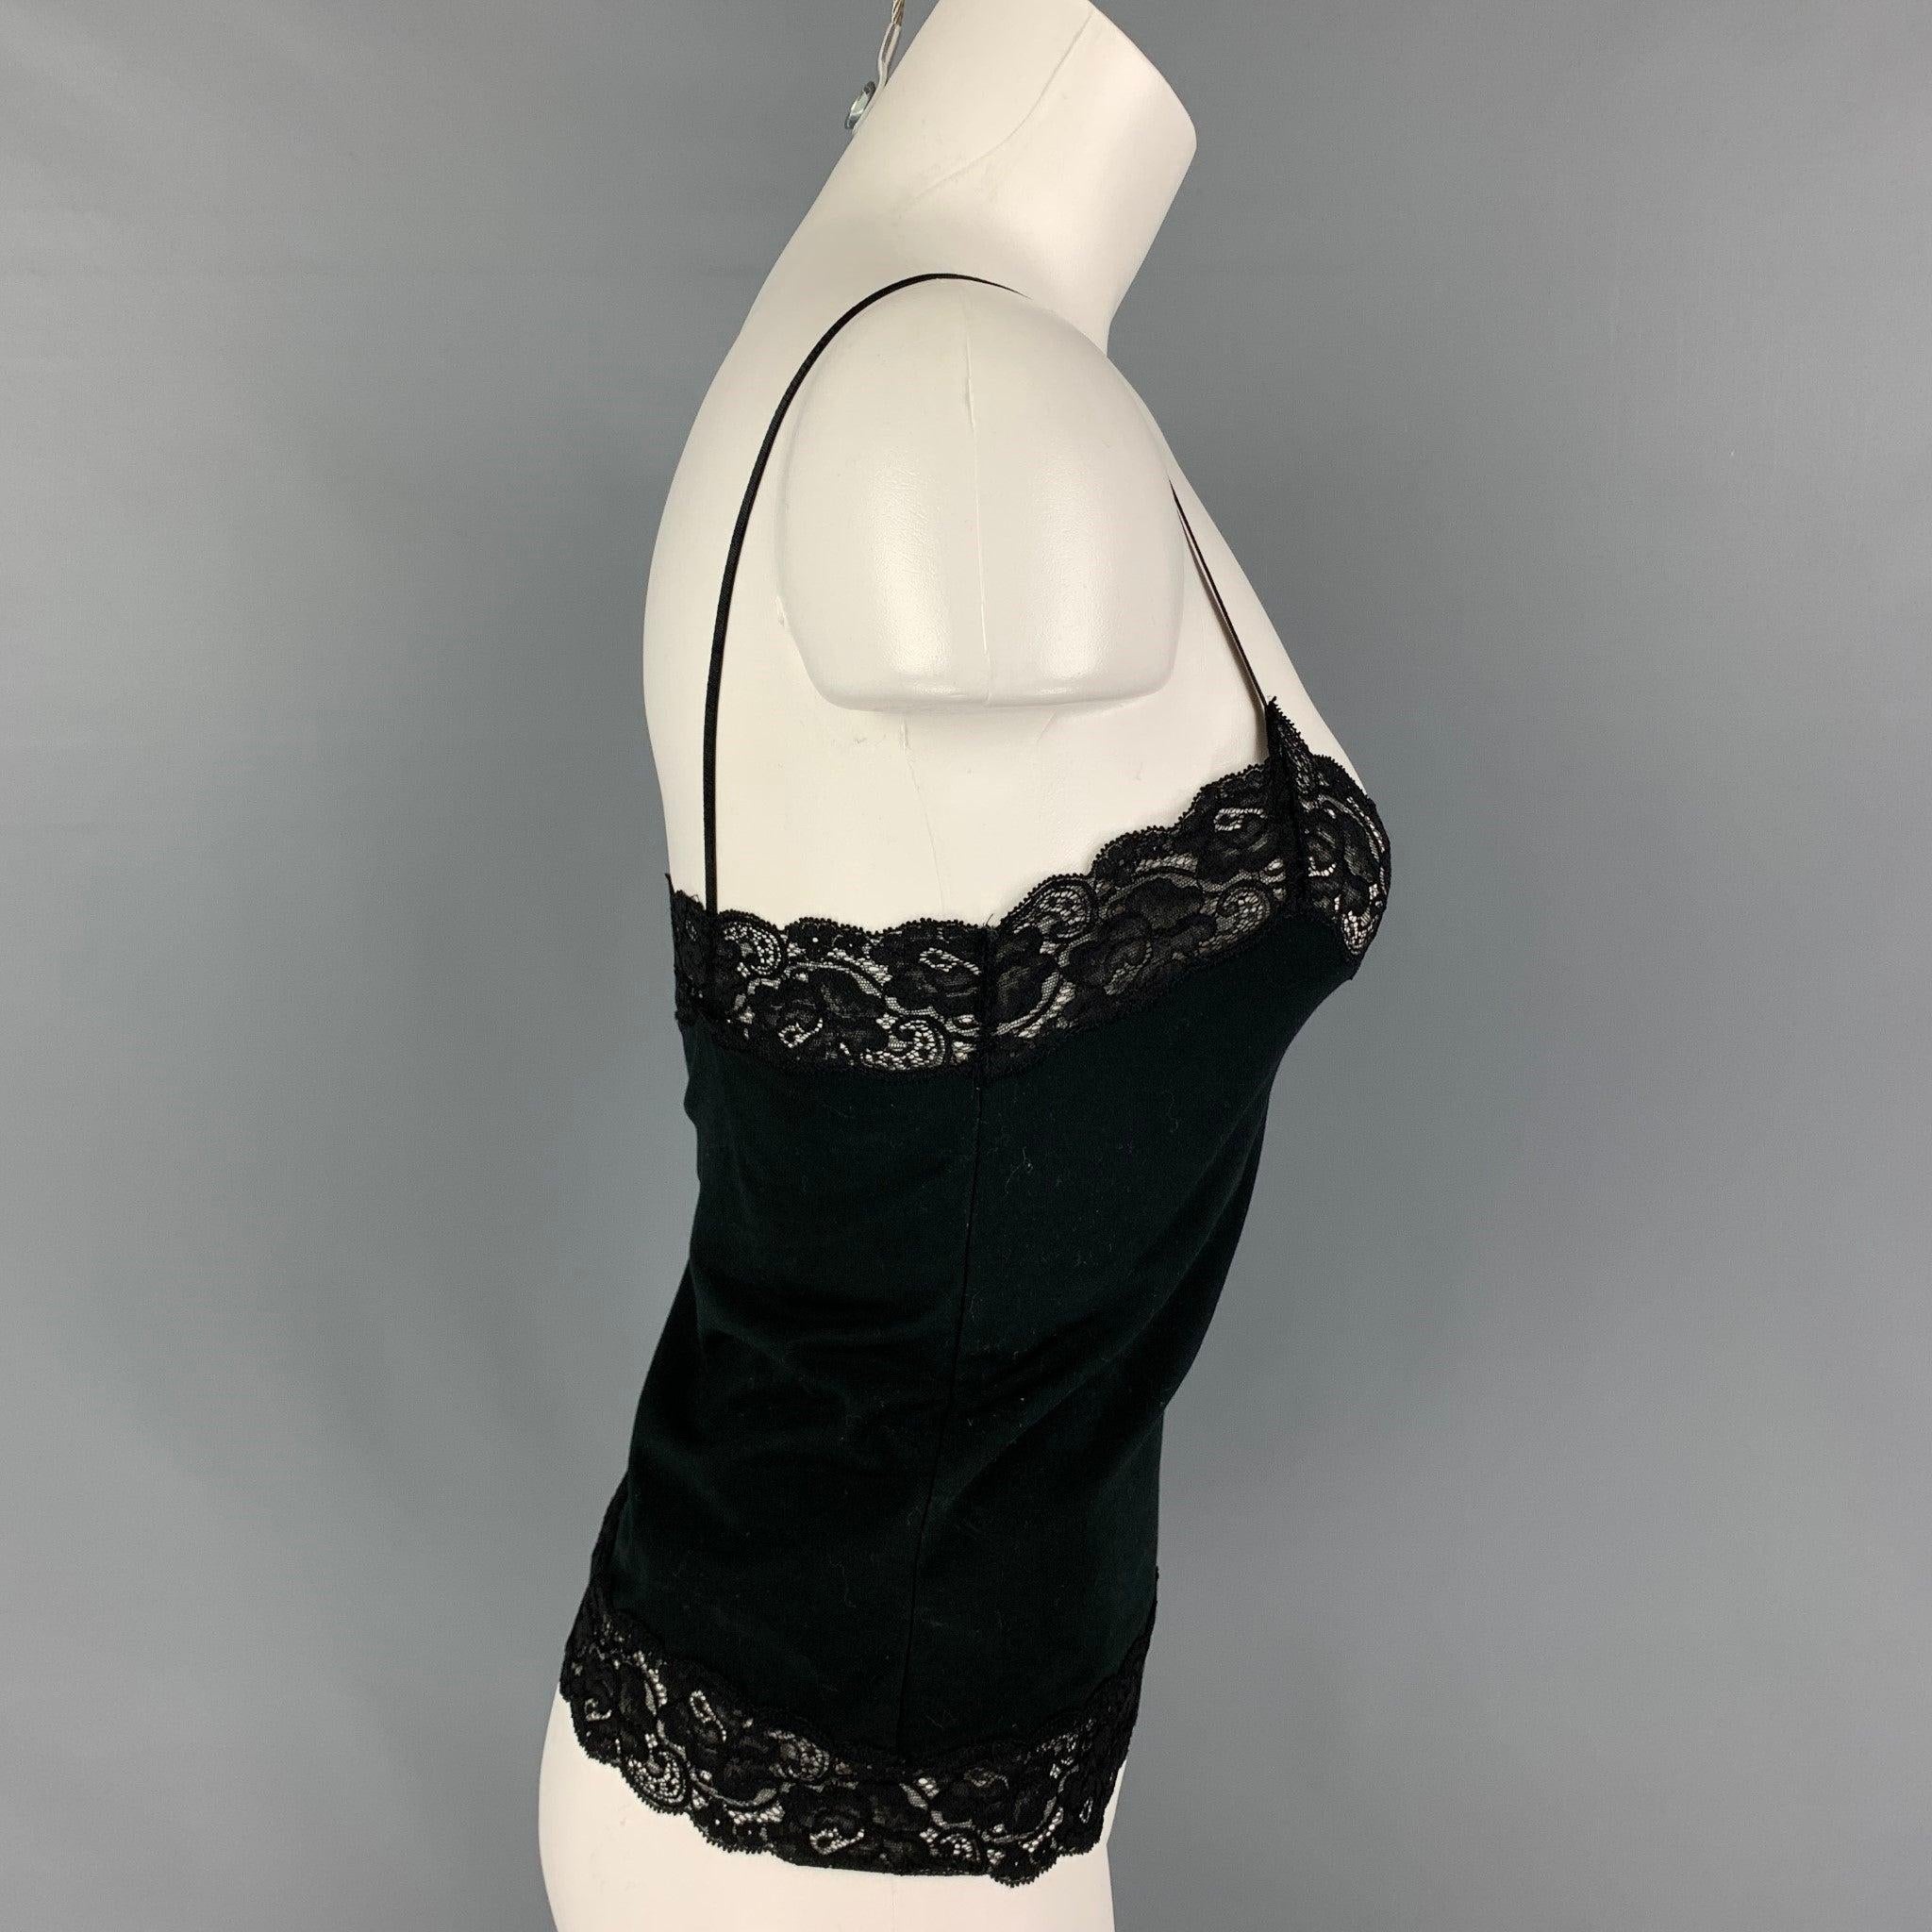 RALPH LAUREN 'Black Label' camisole comes in a mercerized cotton featuring a lace panel and a spaghetti straps.
Good
Pre-Owned Condition. Light marks. As-Is.  

Marked:   M/M 

Measurements: 
  Bust: 28 inches  Length: 12.5 inches 
  
  
